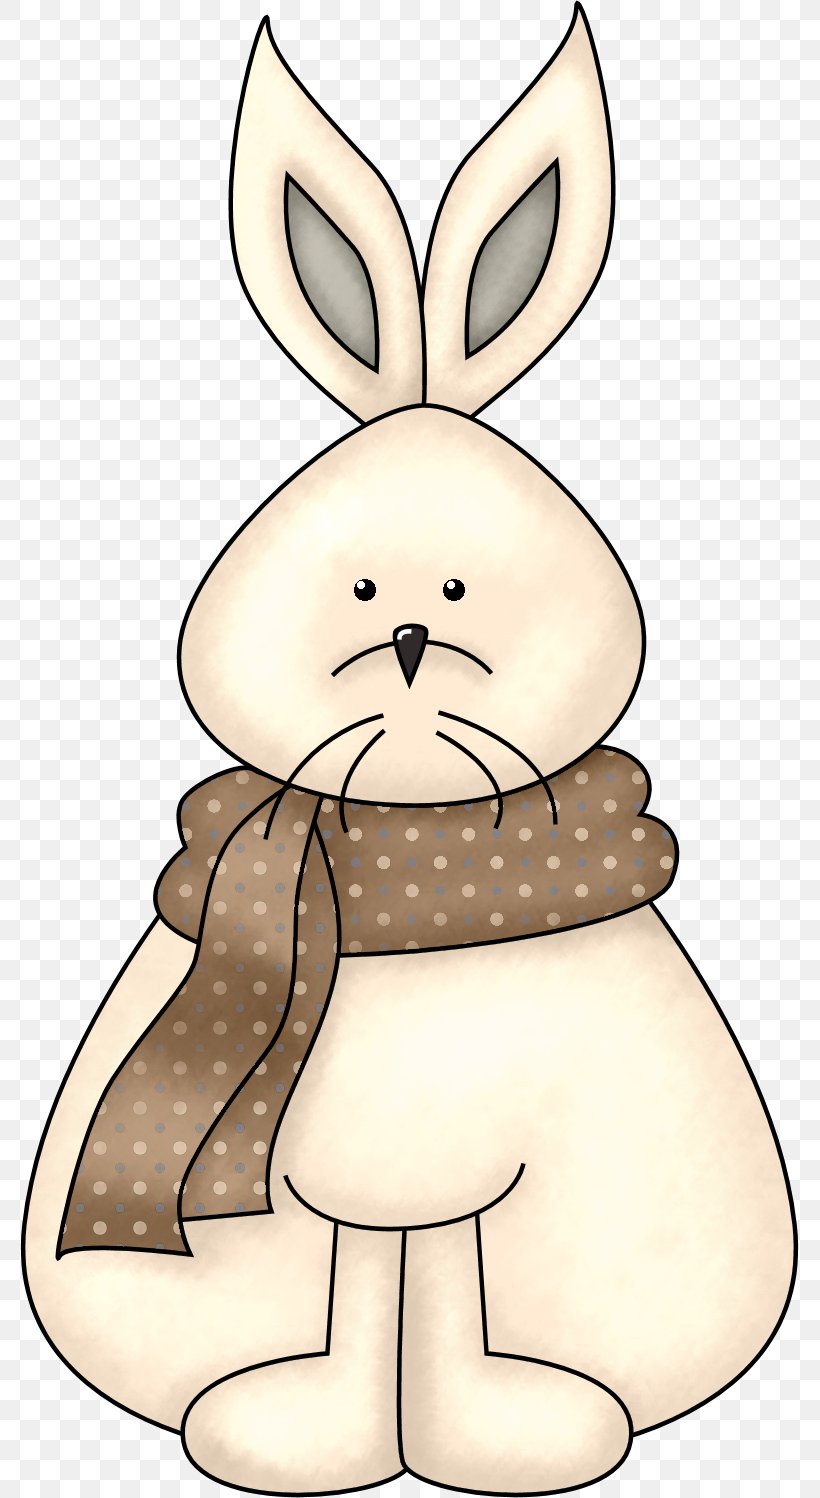 Hare Domestic Rabbit Clip Art, PNG, 779x1498px, Hare, Domestic Rabbit, Easter Bunny, Free Content, Line Art Download Free